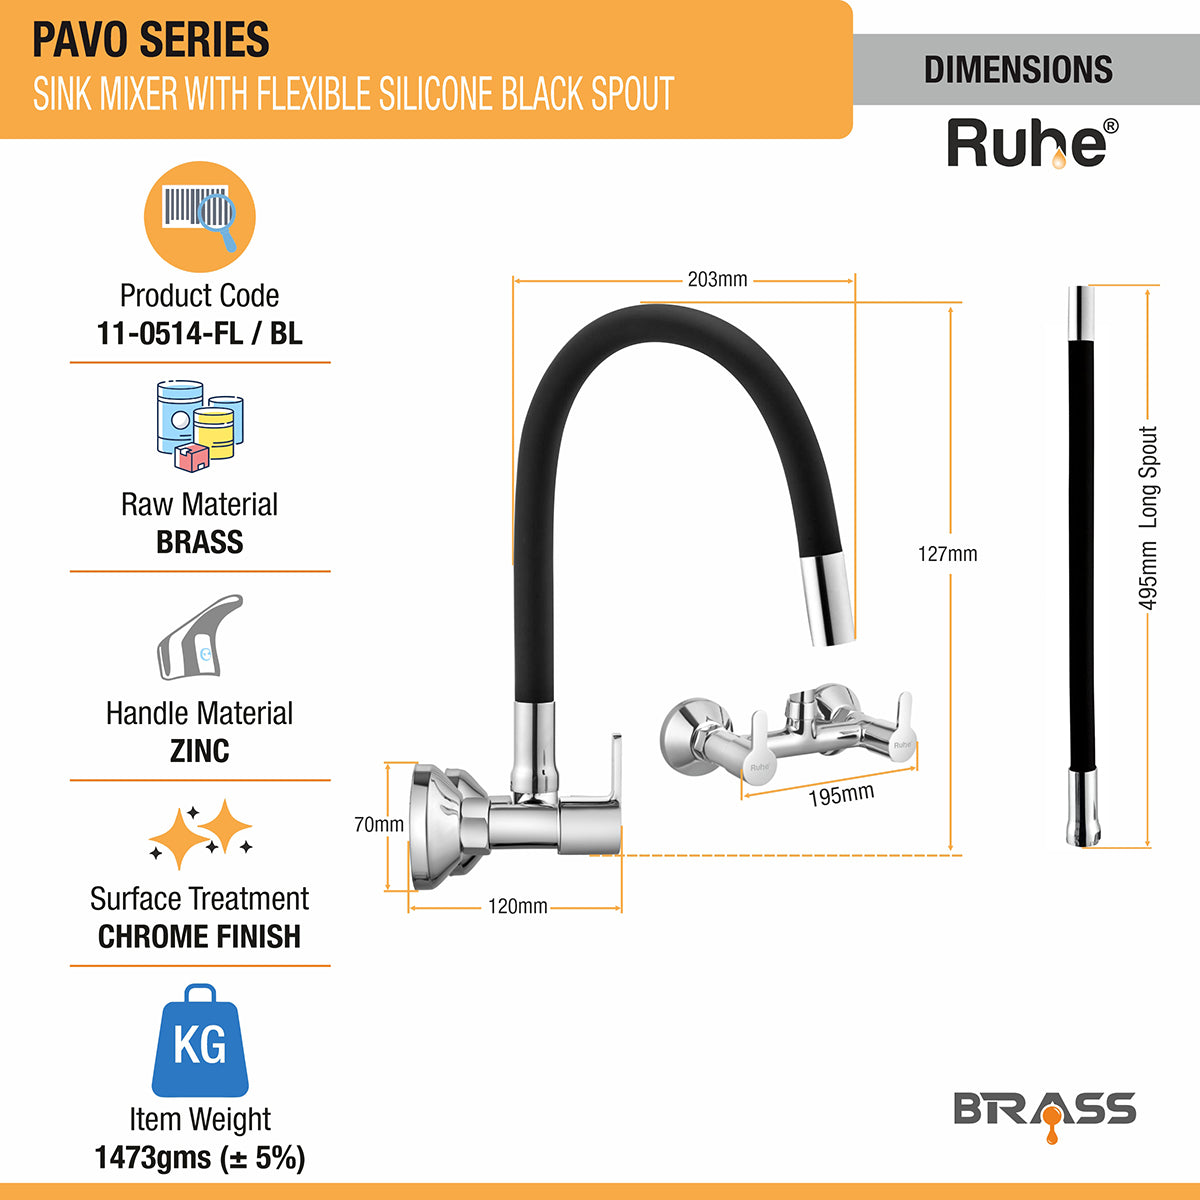 Pavo Sink Mixer Brass Faucet with Flexible Silicone Black Spout dimensions and sizes